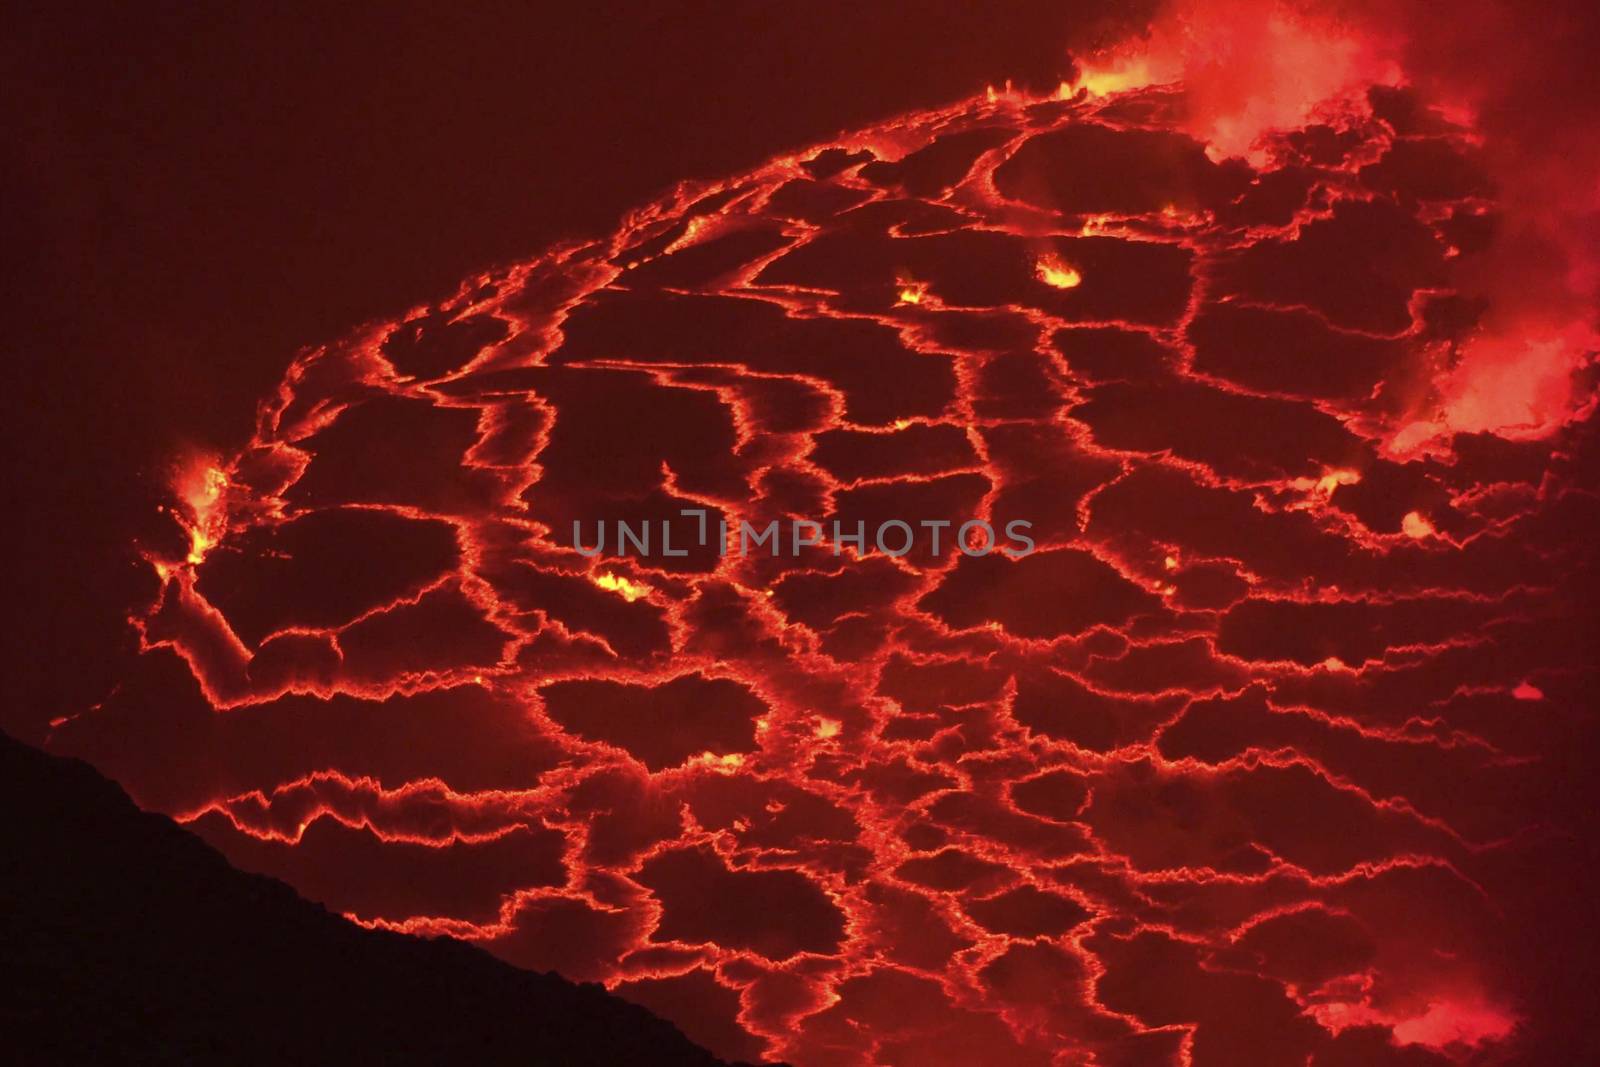 Mouth of the volcano with magma. Molten magma in the muzzle.